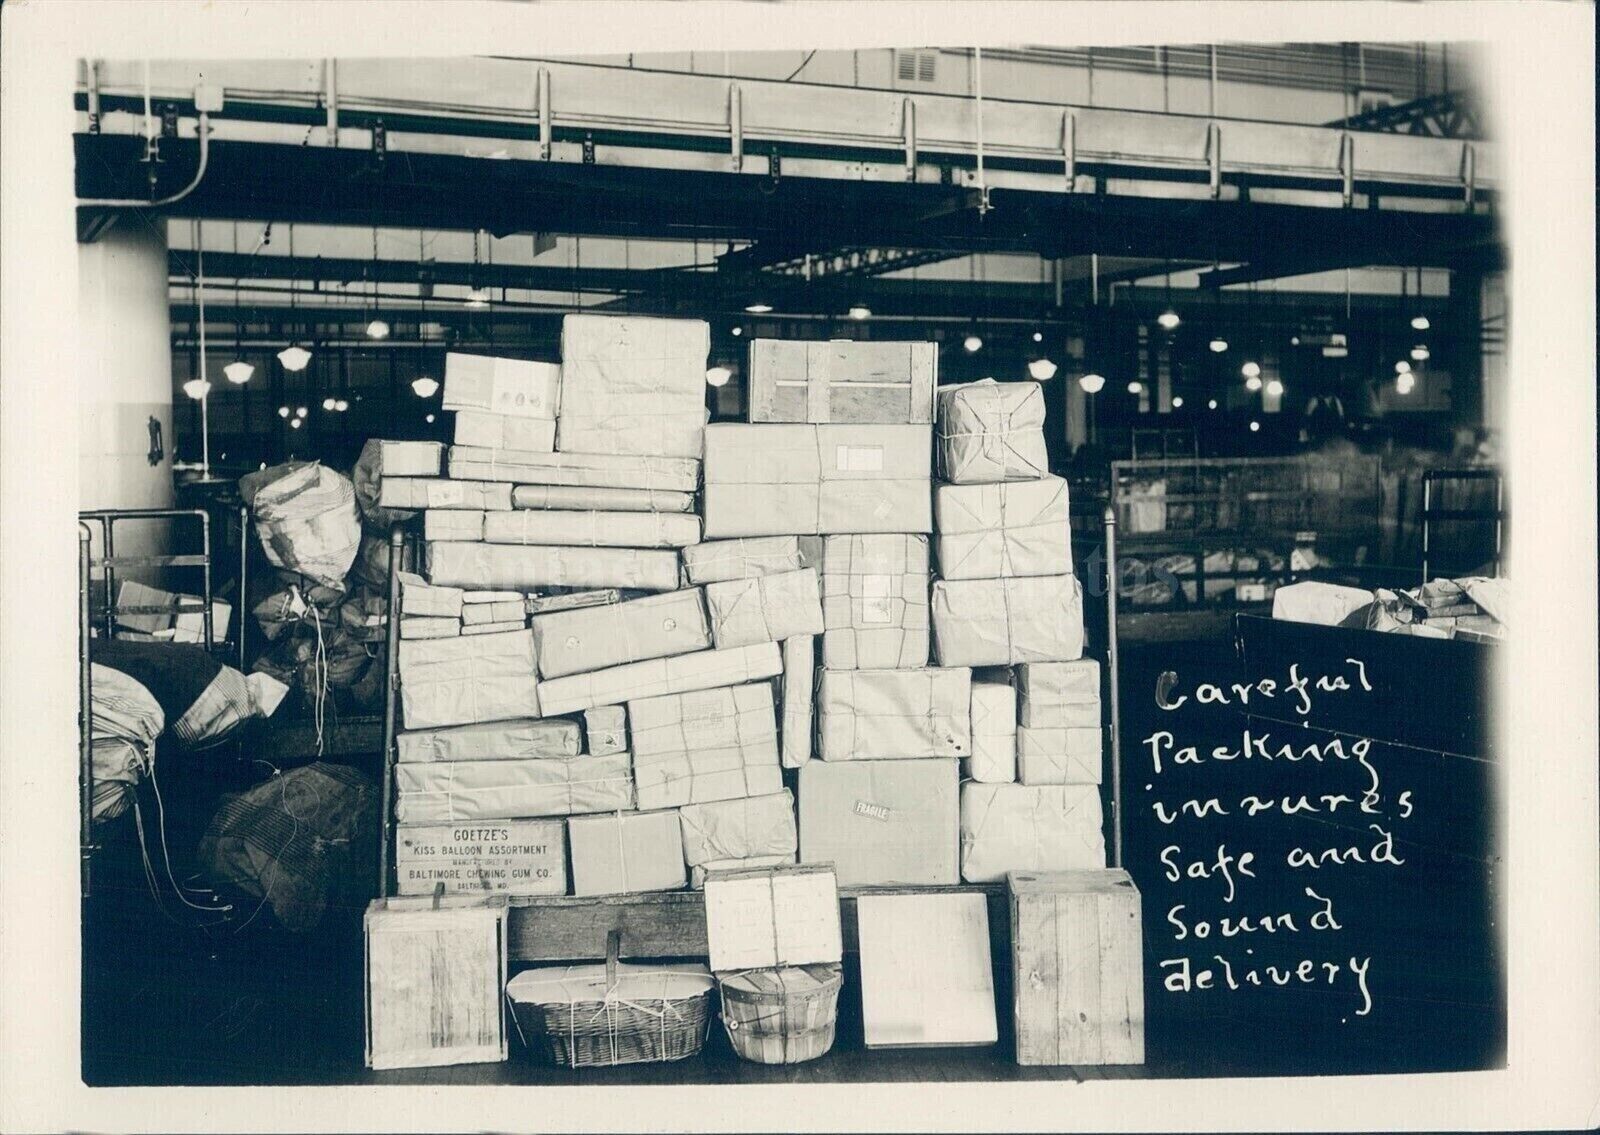 1925 US Post Office Business Packing Safe Sound Delivery Vintage Press Photo